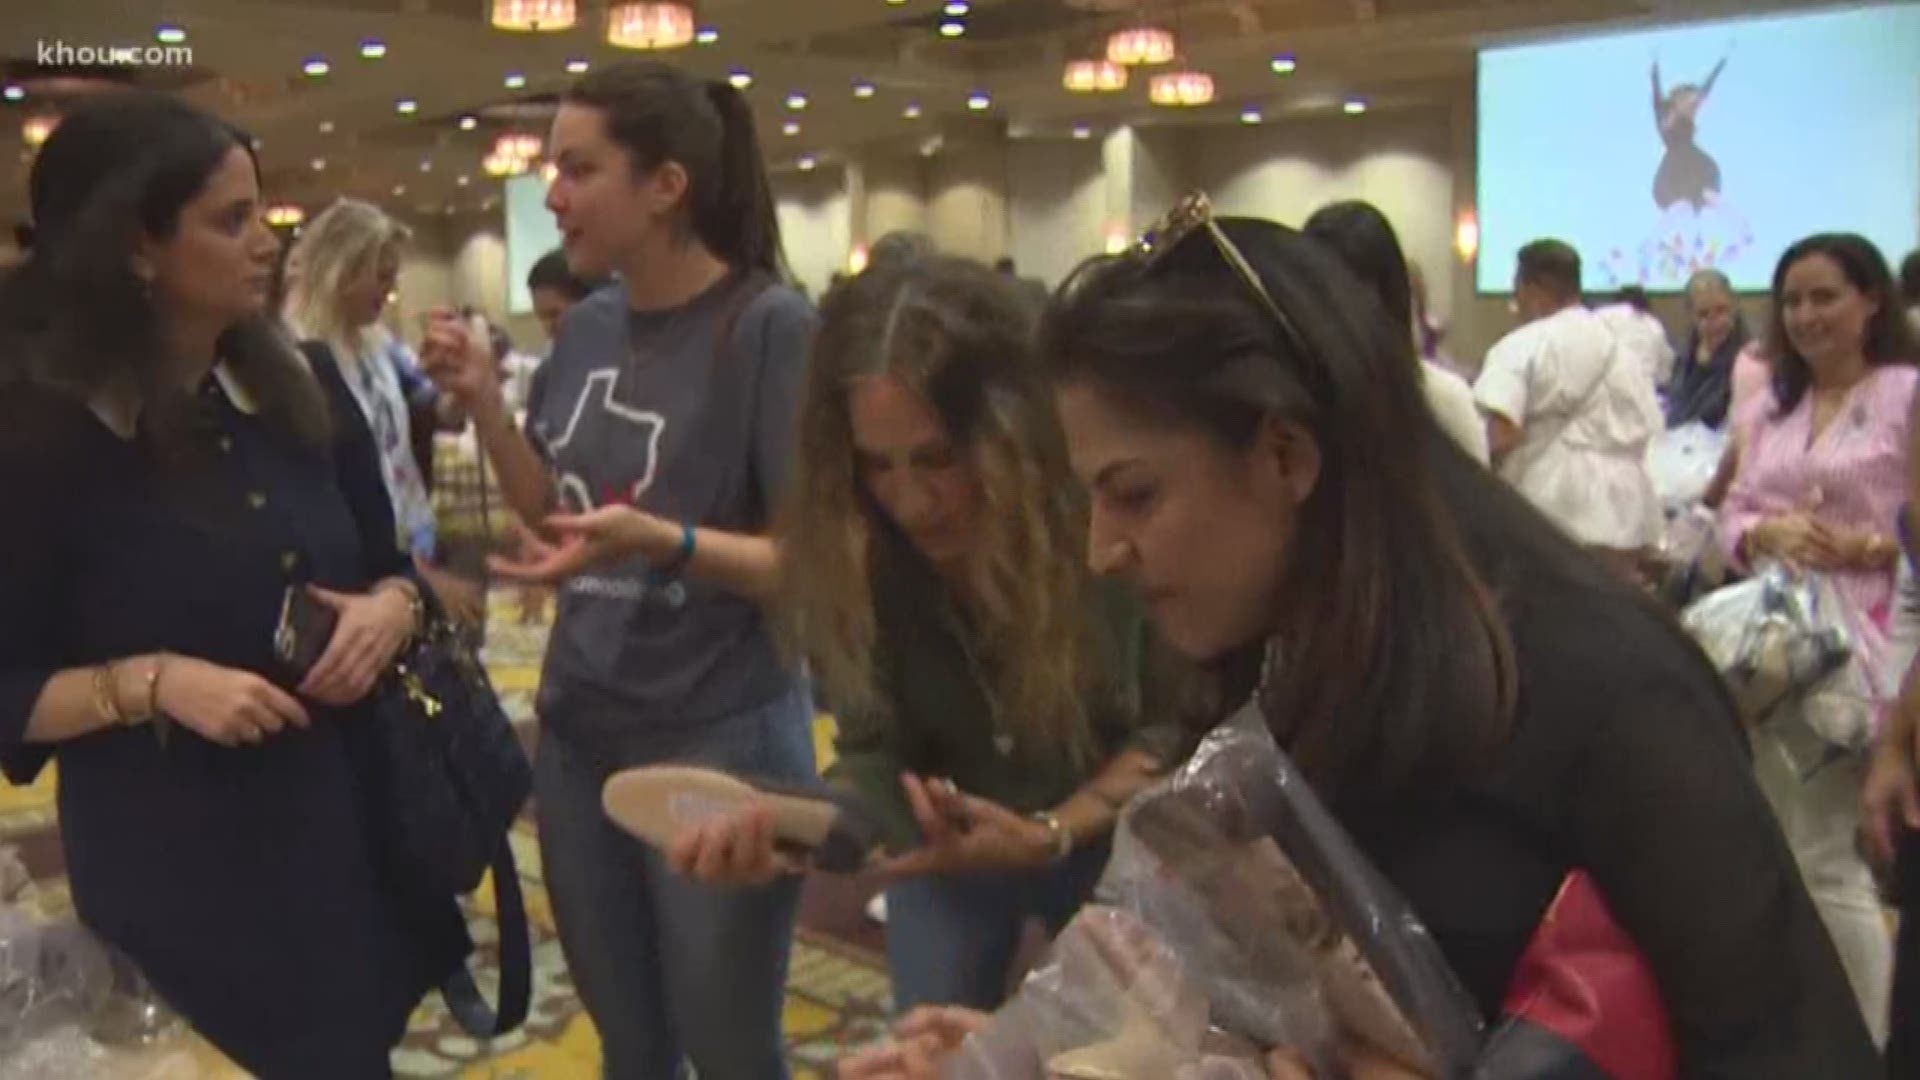 Sarah Jessica Parker is in H-Town and fans are lining up for a chance to buy her shoes and help raise money for MD Anderson Cancer Center.